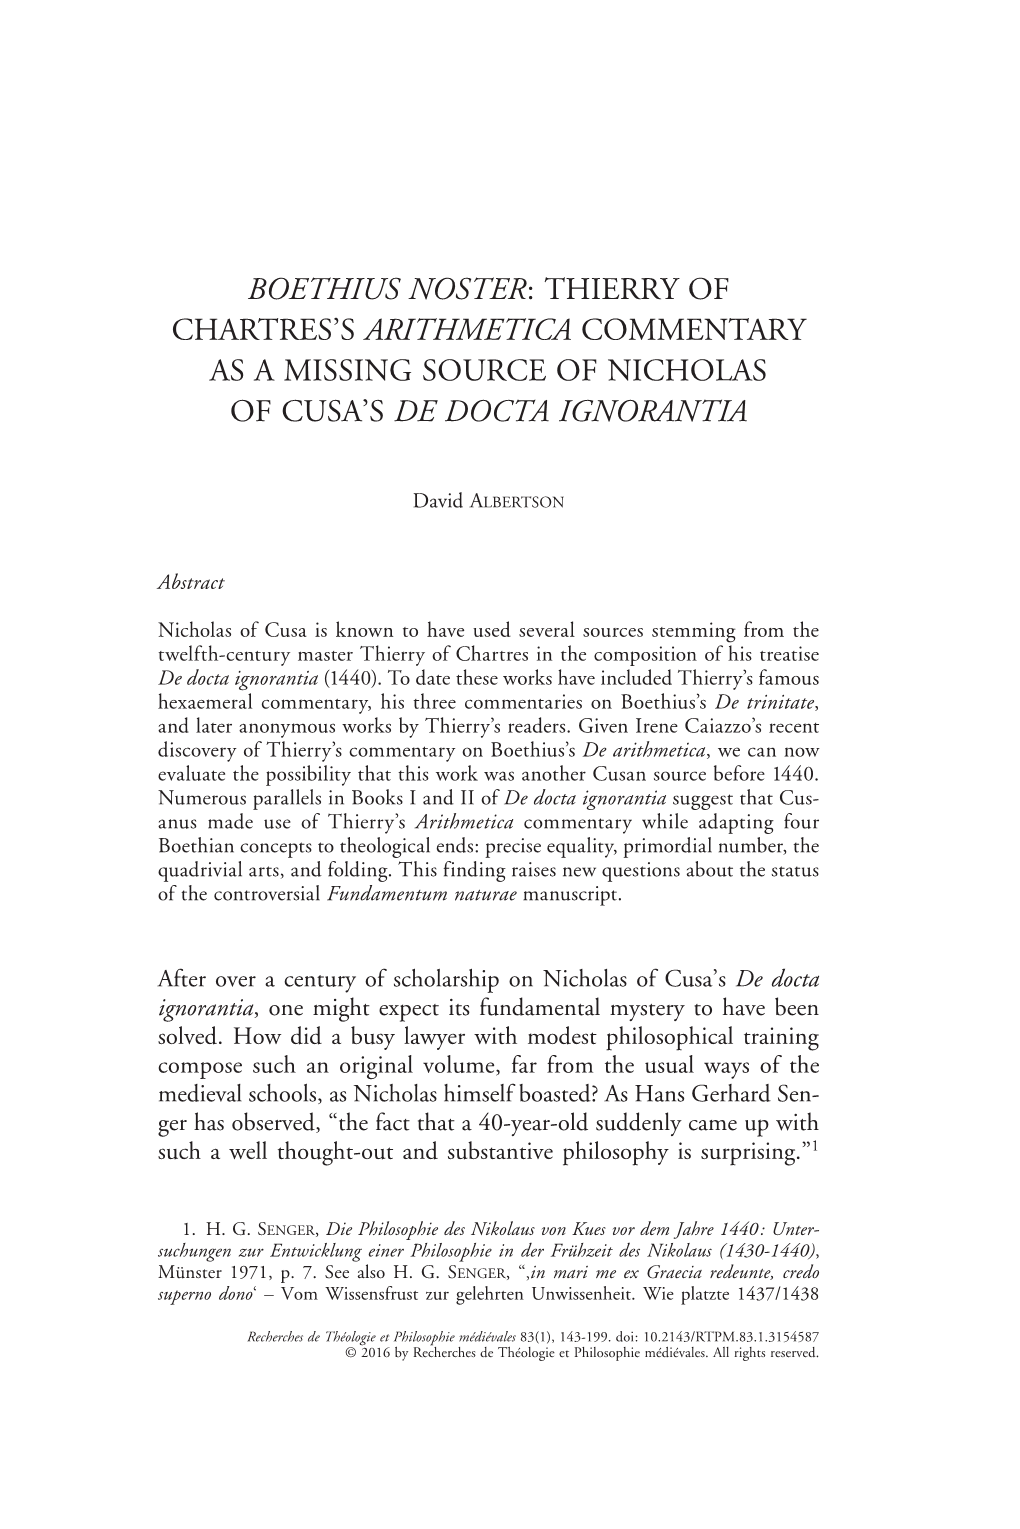 BOETHIUS NOSTER: Thierry of Chartres's ARITHMETICA